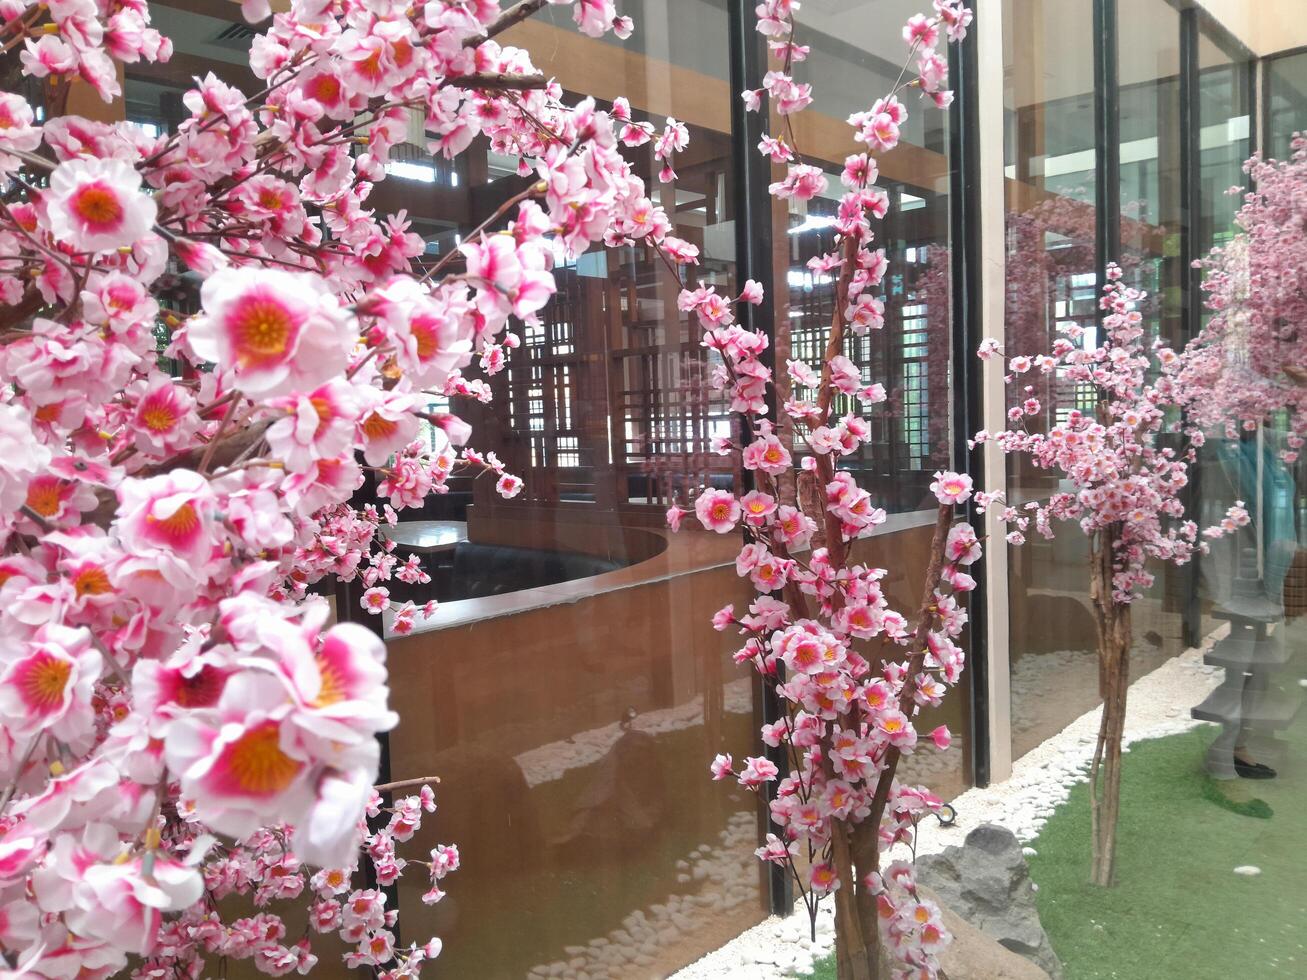 Photo of cherry blossom plants. Perfect for wallpaper, background, banner, web, advertising